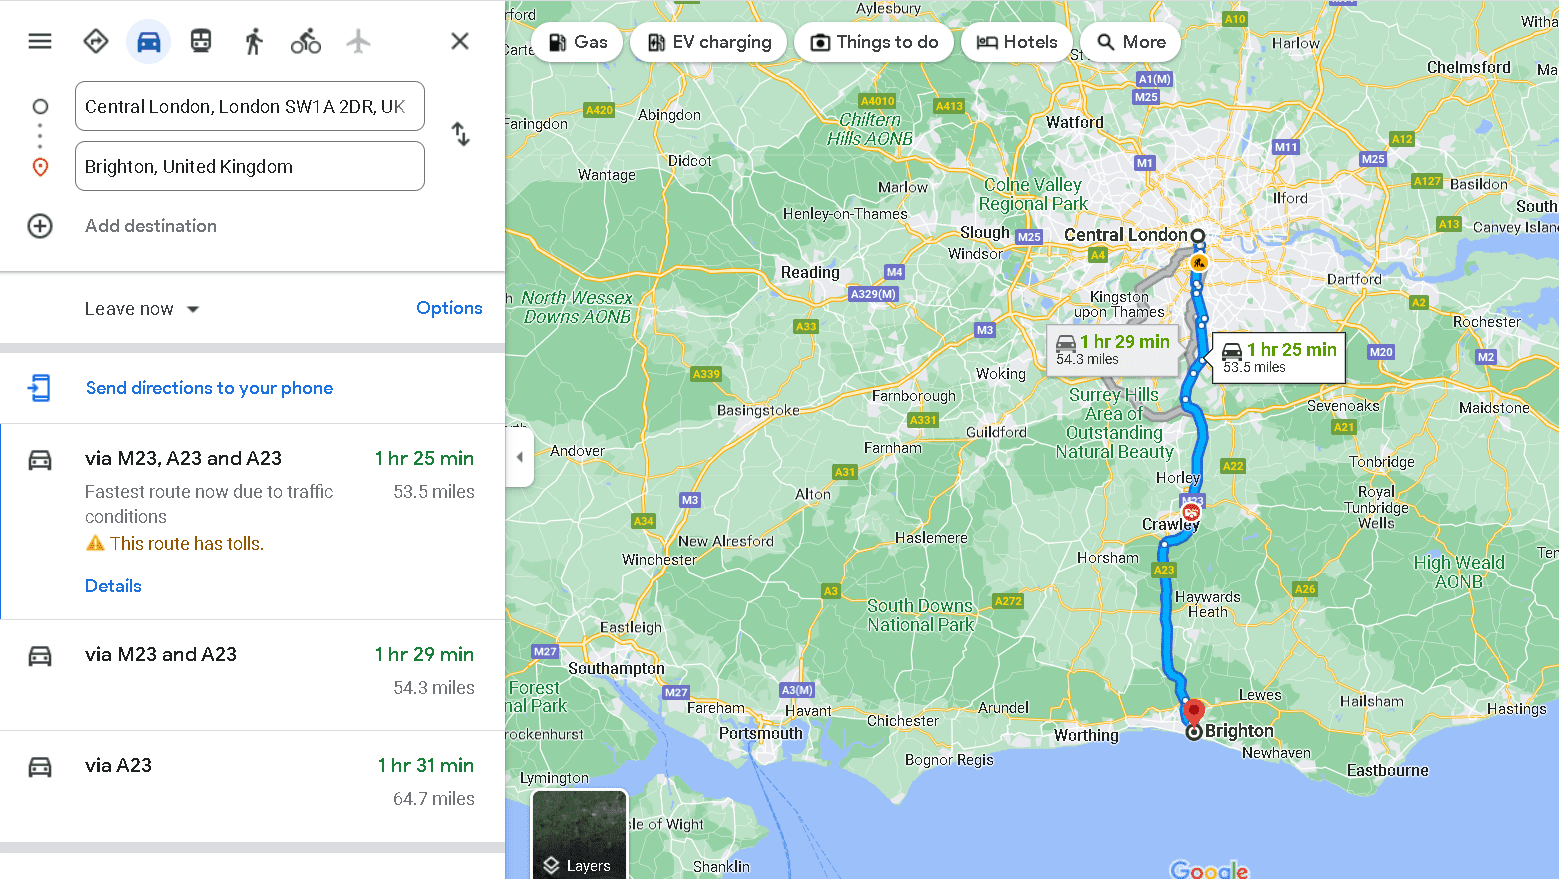 From London to Brighton